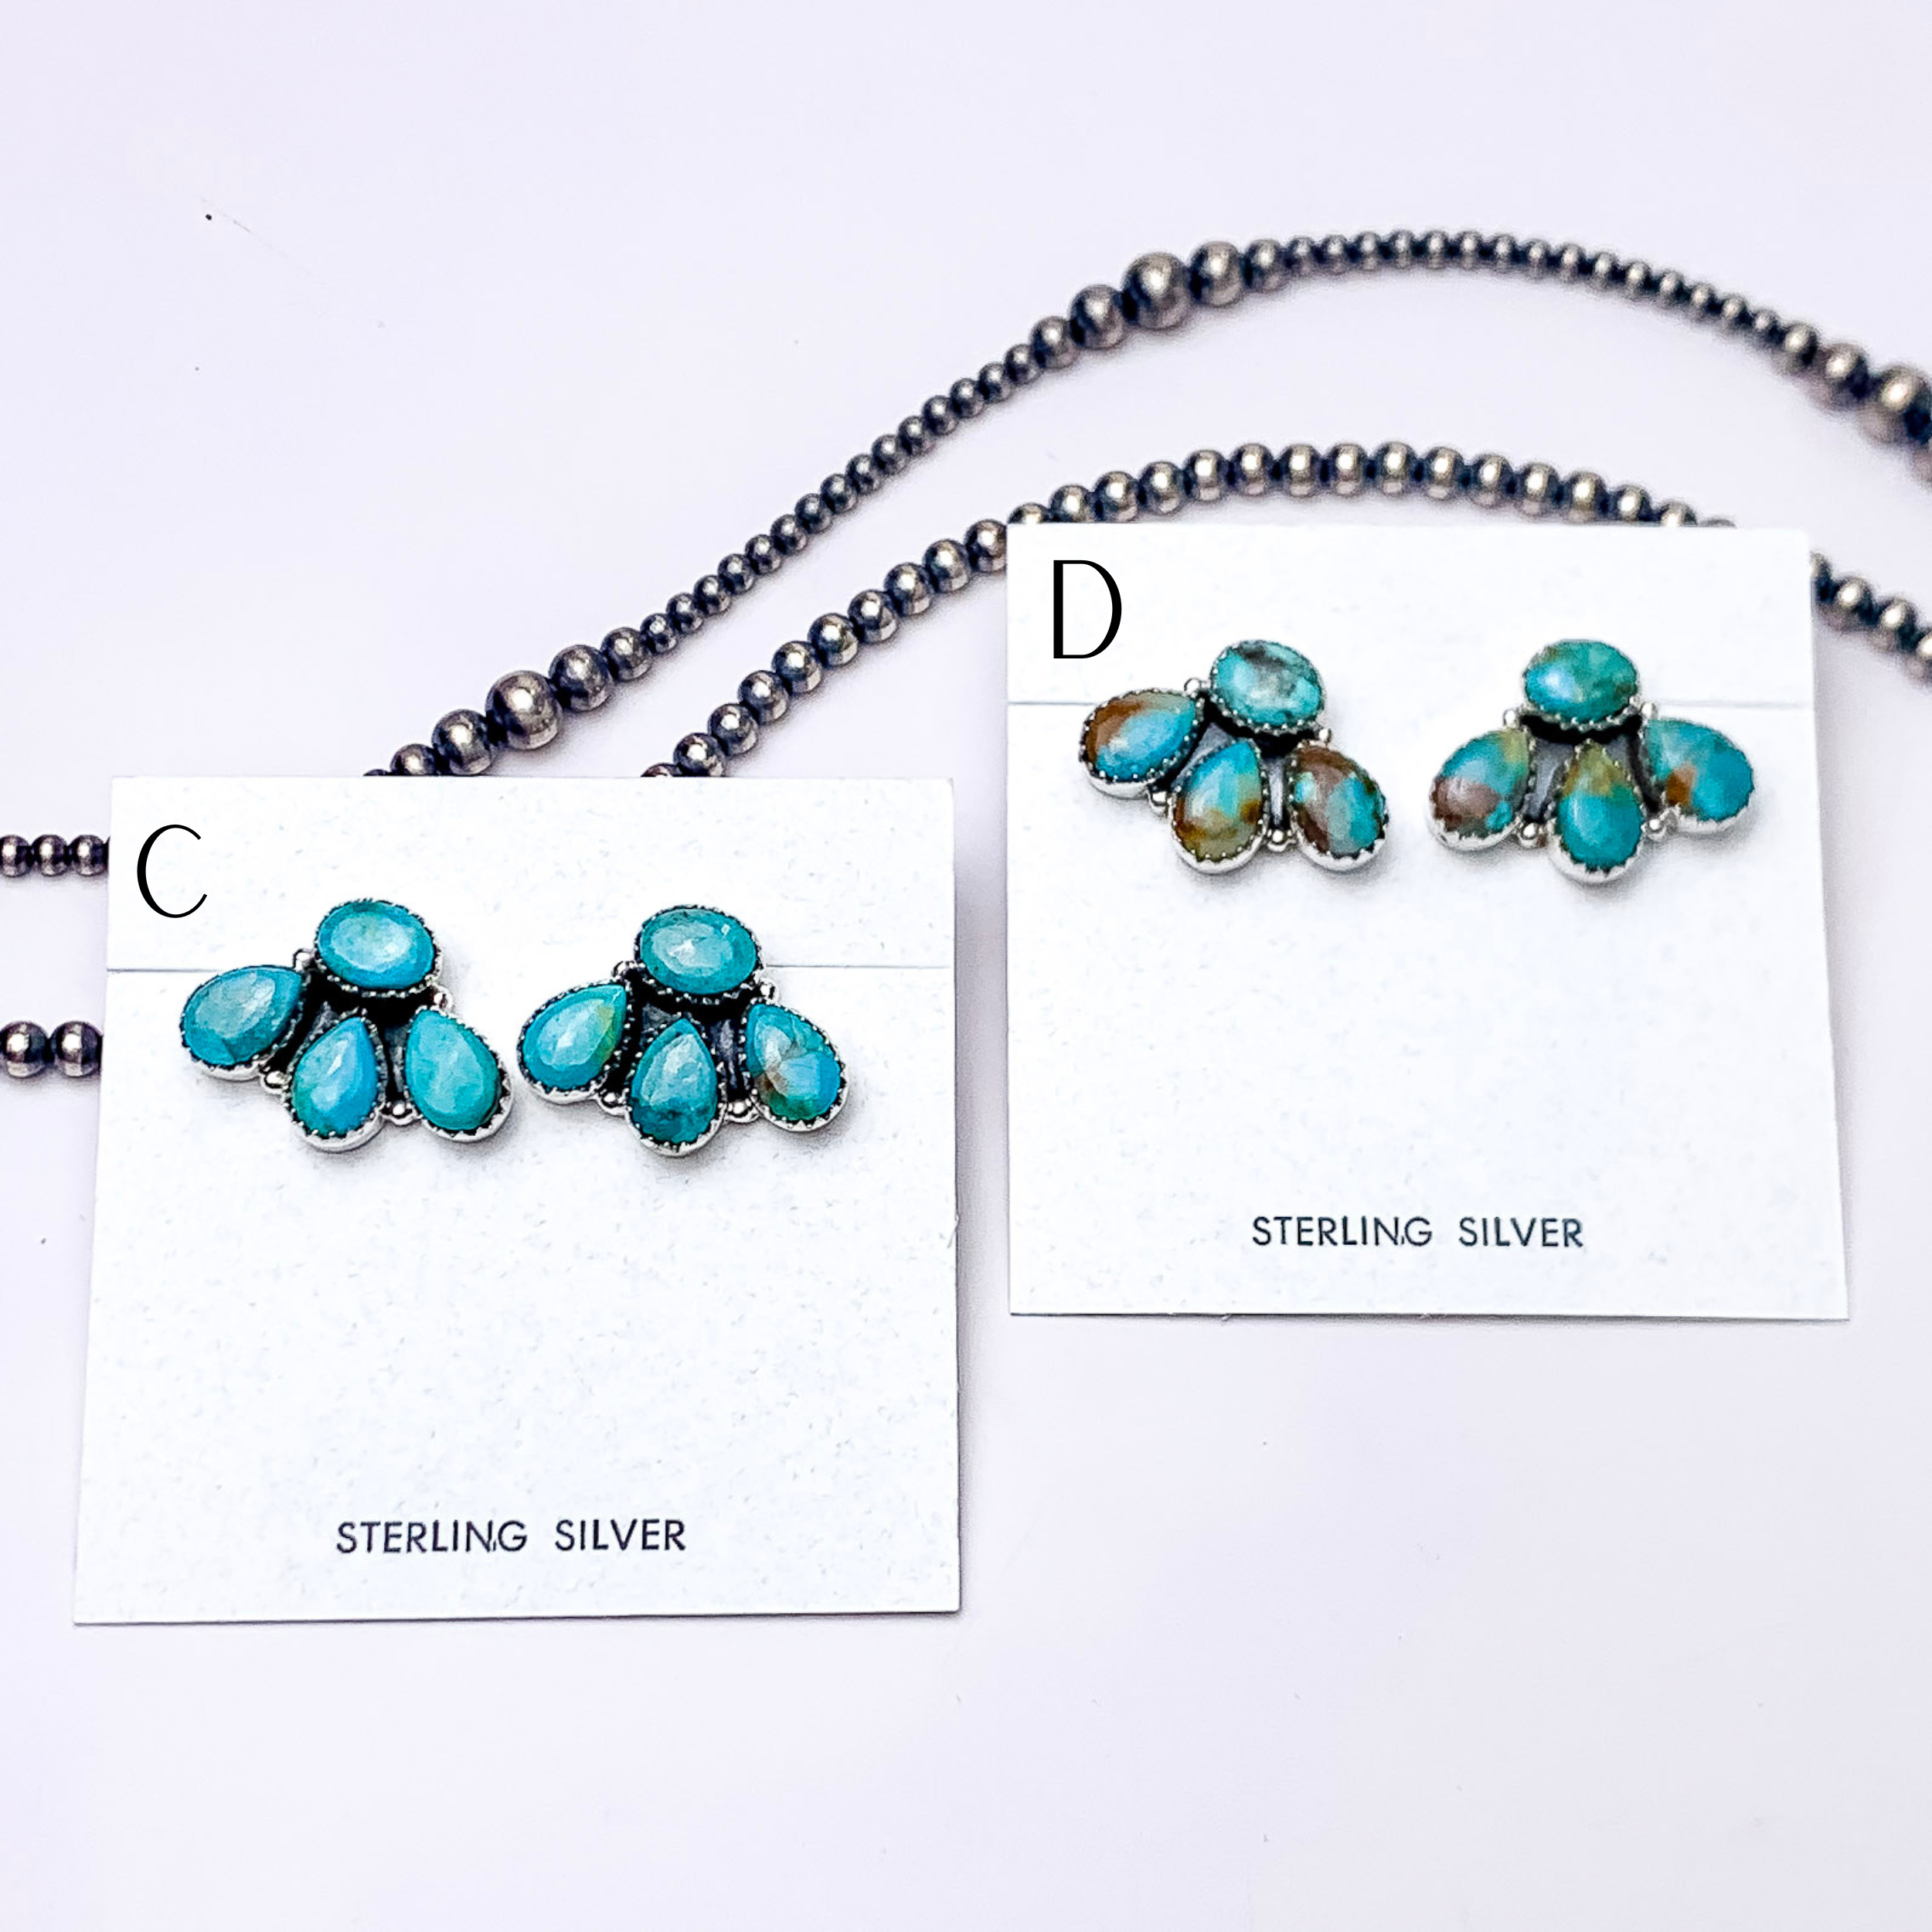 Hada Collection | Handmade Sterling Silver Circle Cluster Stud Earrings with Kingman Turquoise Remix Stones - Giddy Up Glamour Boutique